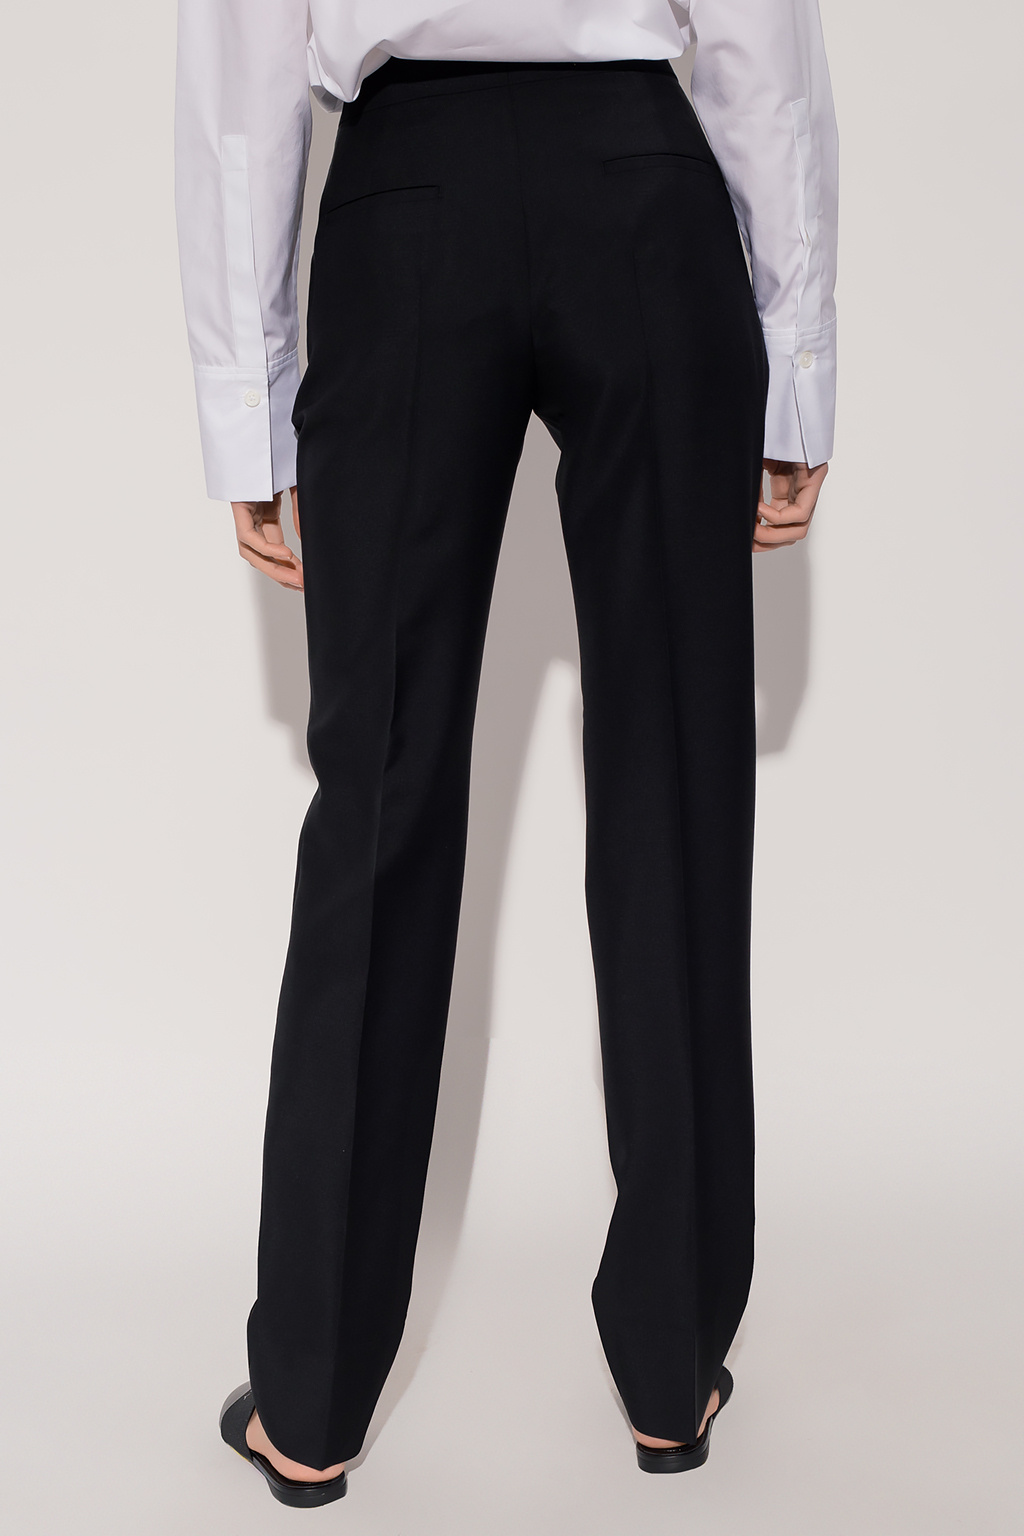 Givenchy Pleat-front Birds trousers